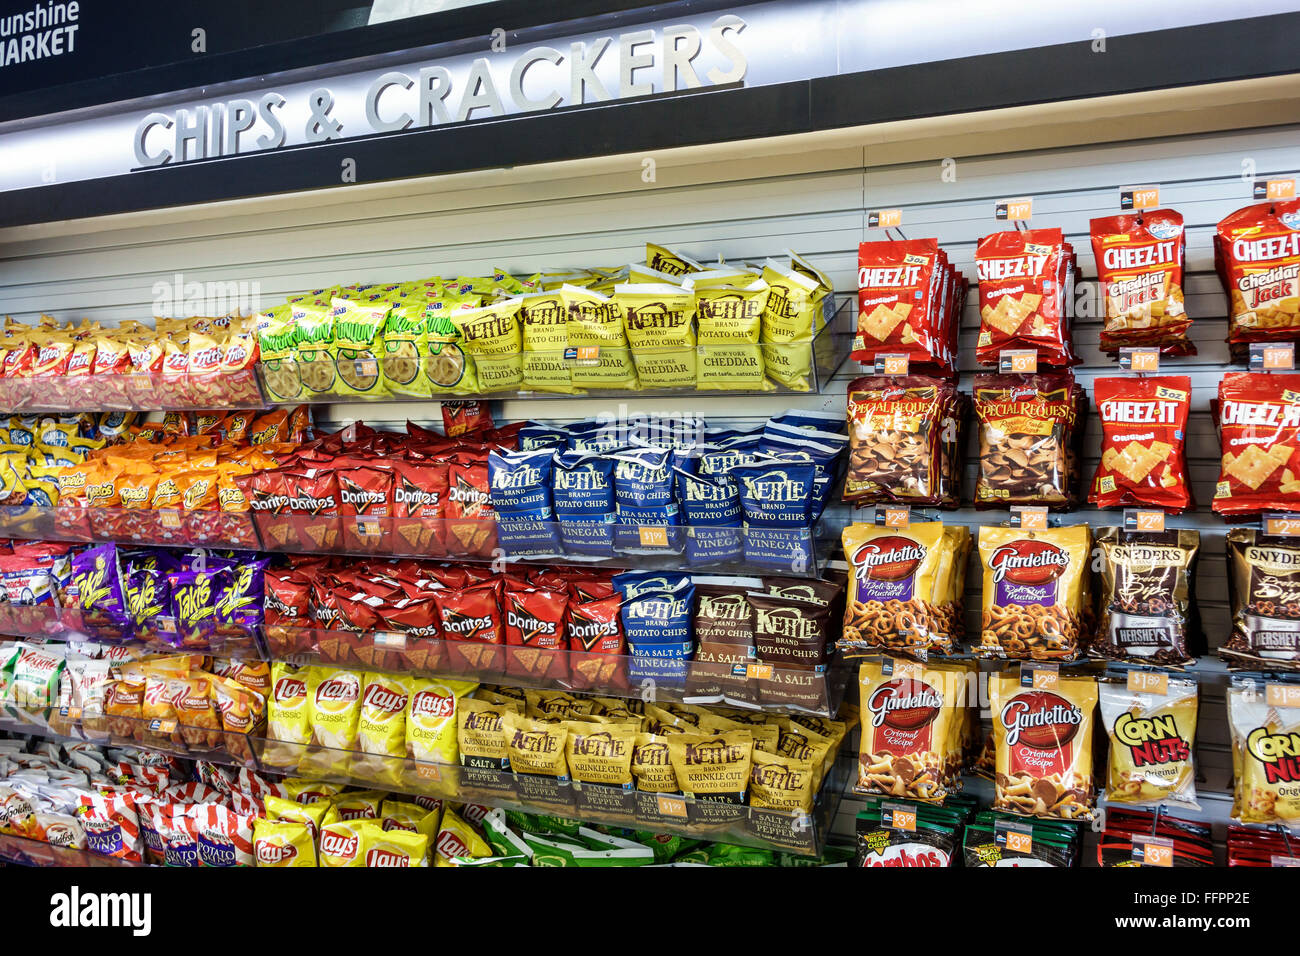 Florida South,Fort Ft. Drum,Turnpike,highway,toll road,rest stop,convenience store,sale,display sale salty snacks,junk food,Pringles,bags,chips,pretze Stock Photo